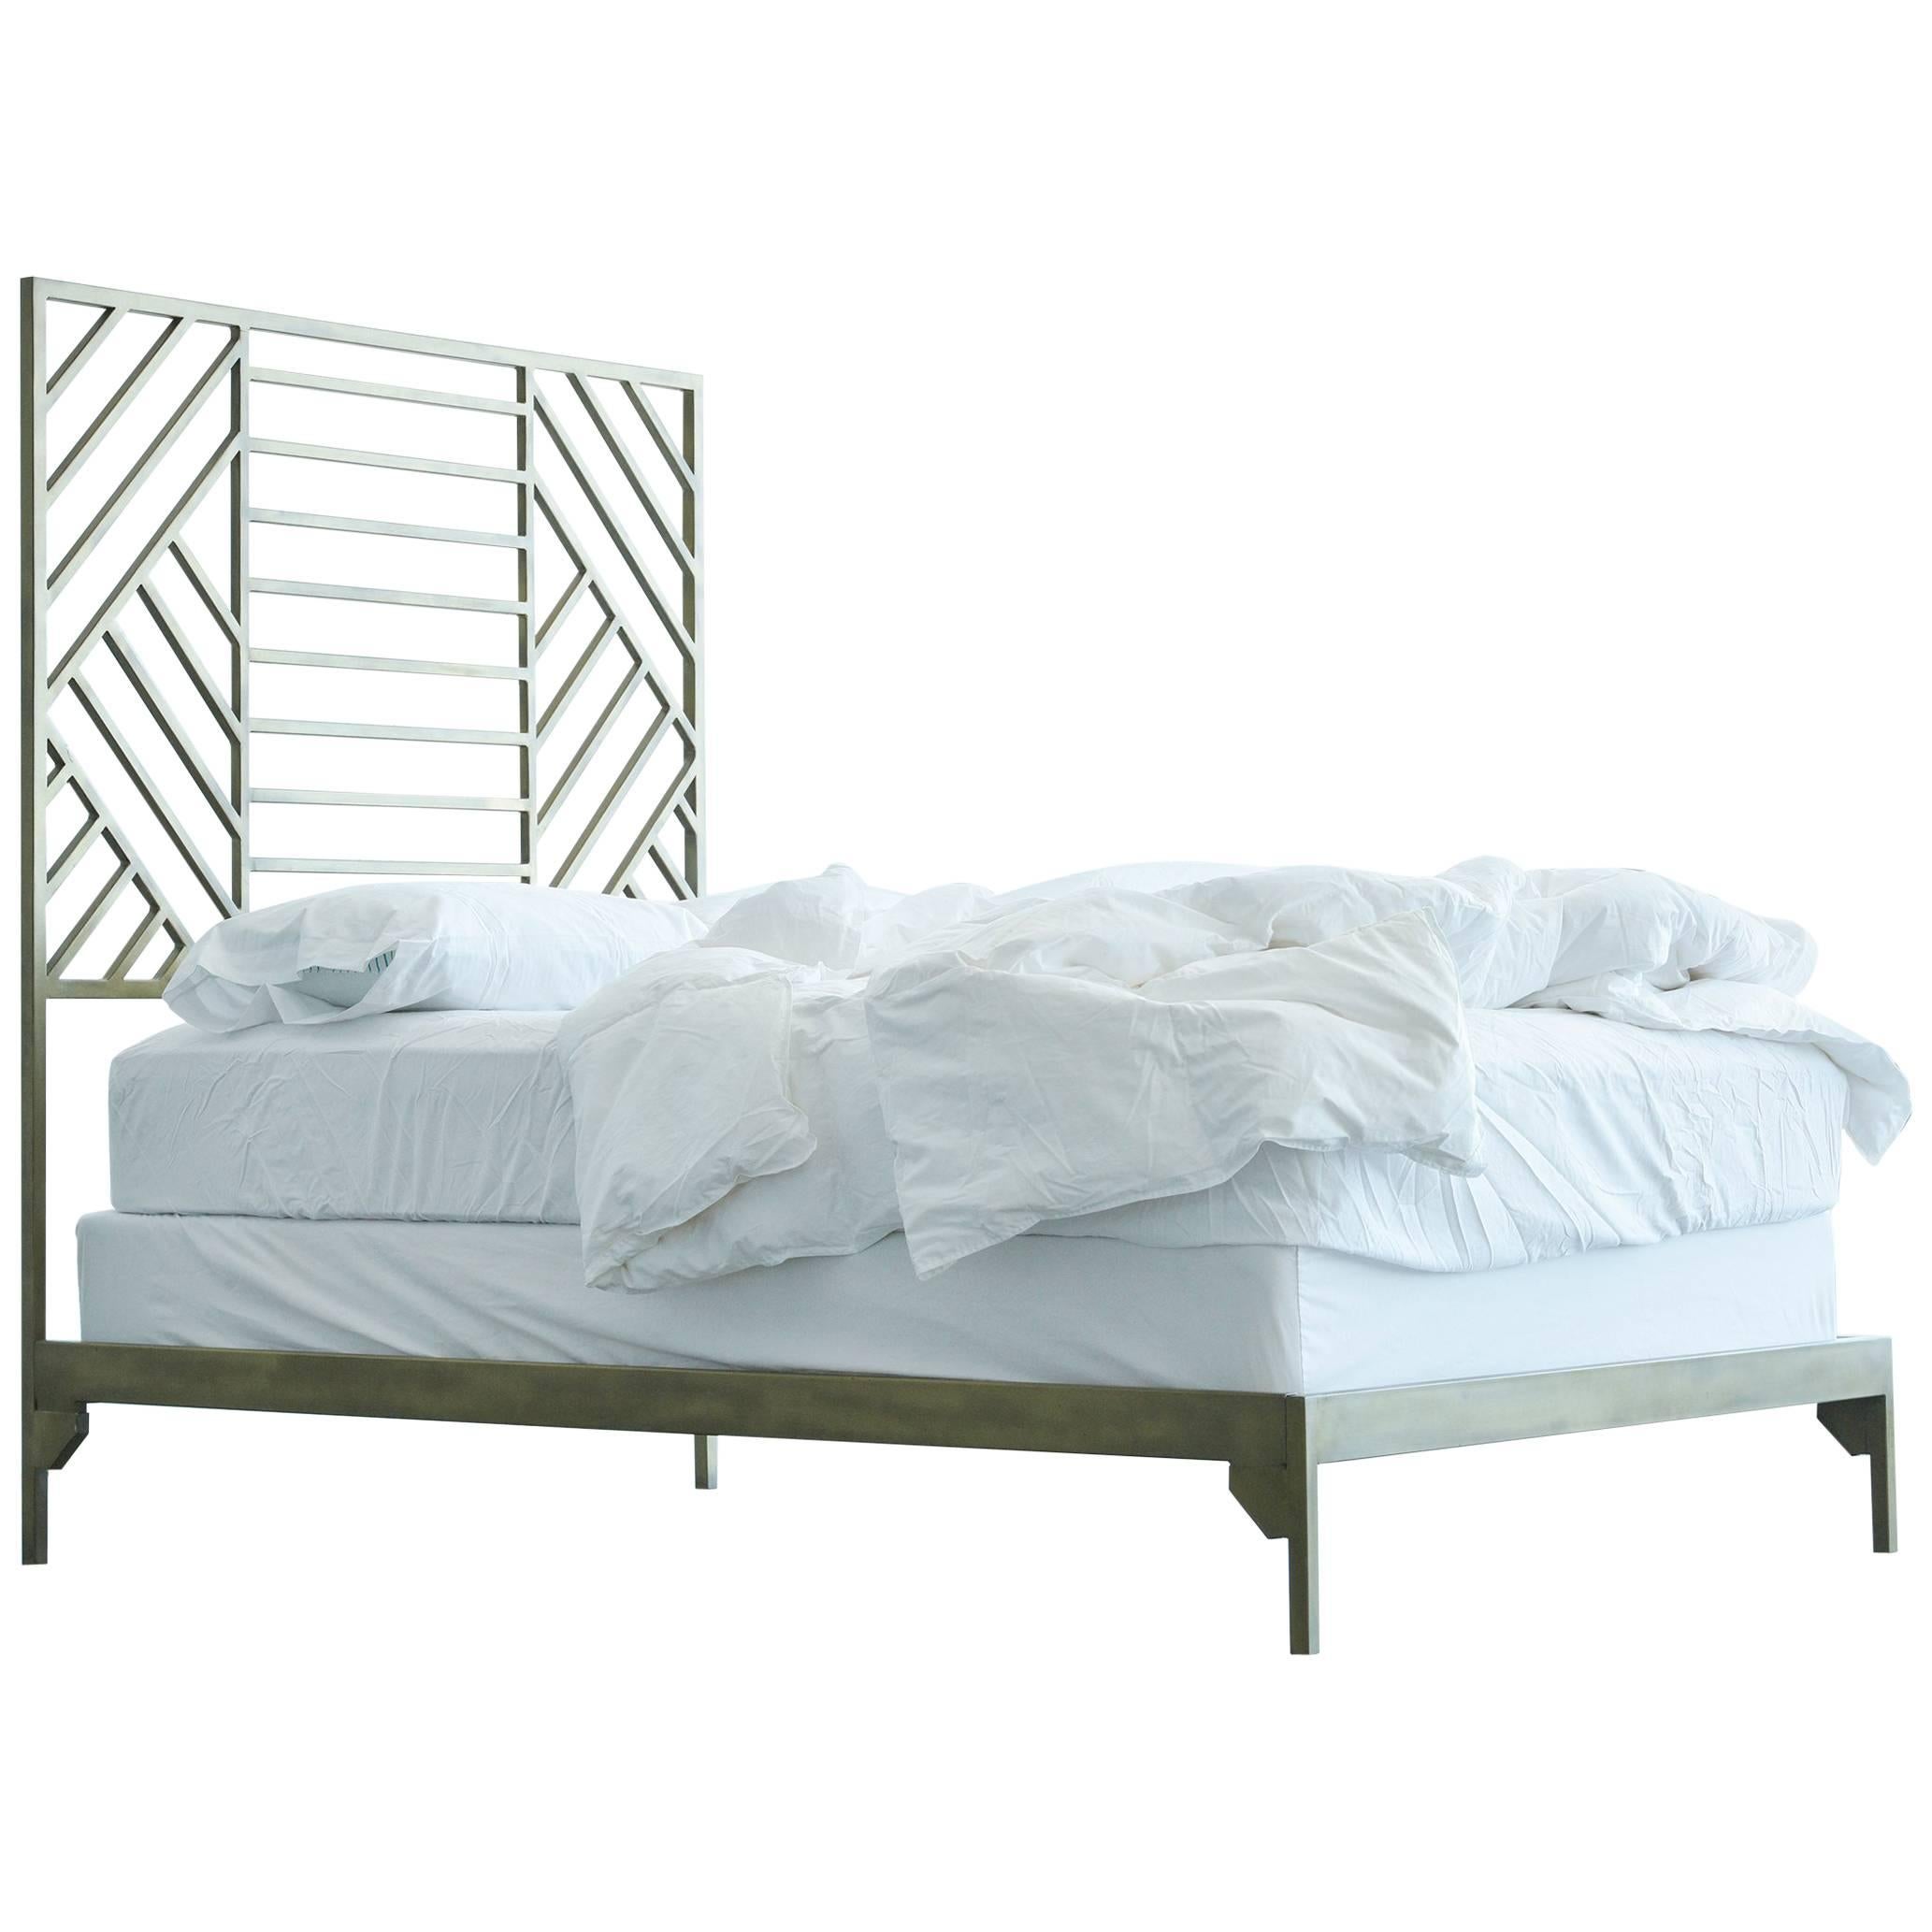 No.2 Metal Bed Frame, Queen Size For Sale